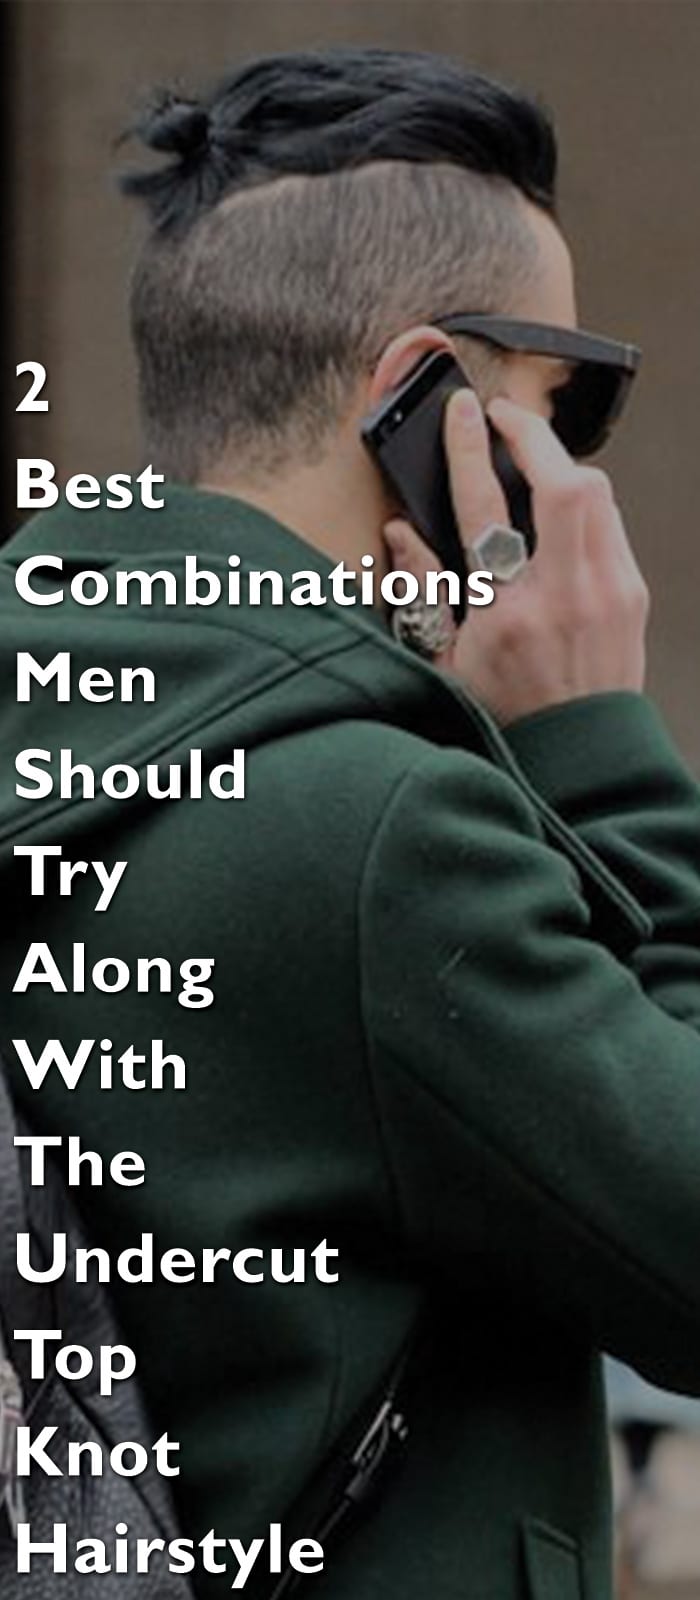 2 Best Combinations Men Should Try Along With The Undercut Top Knot Hairstyle